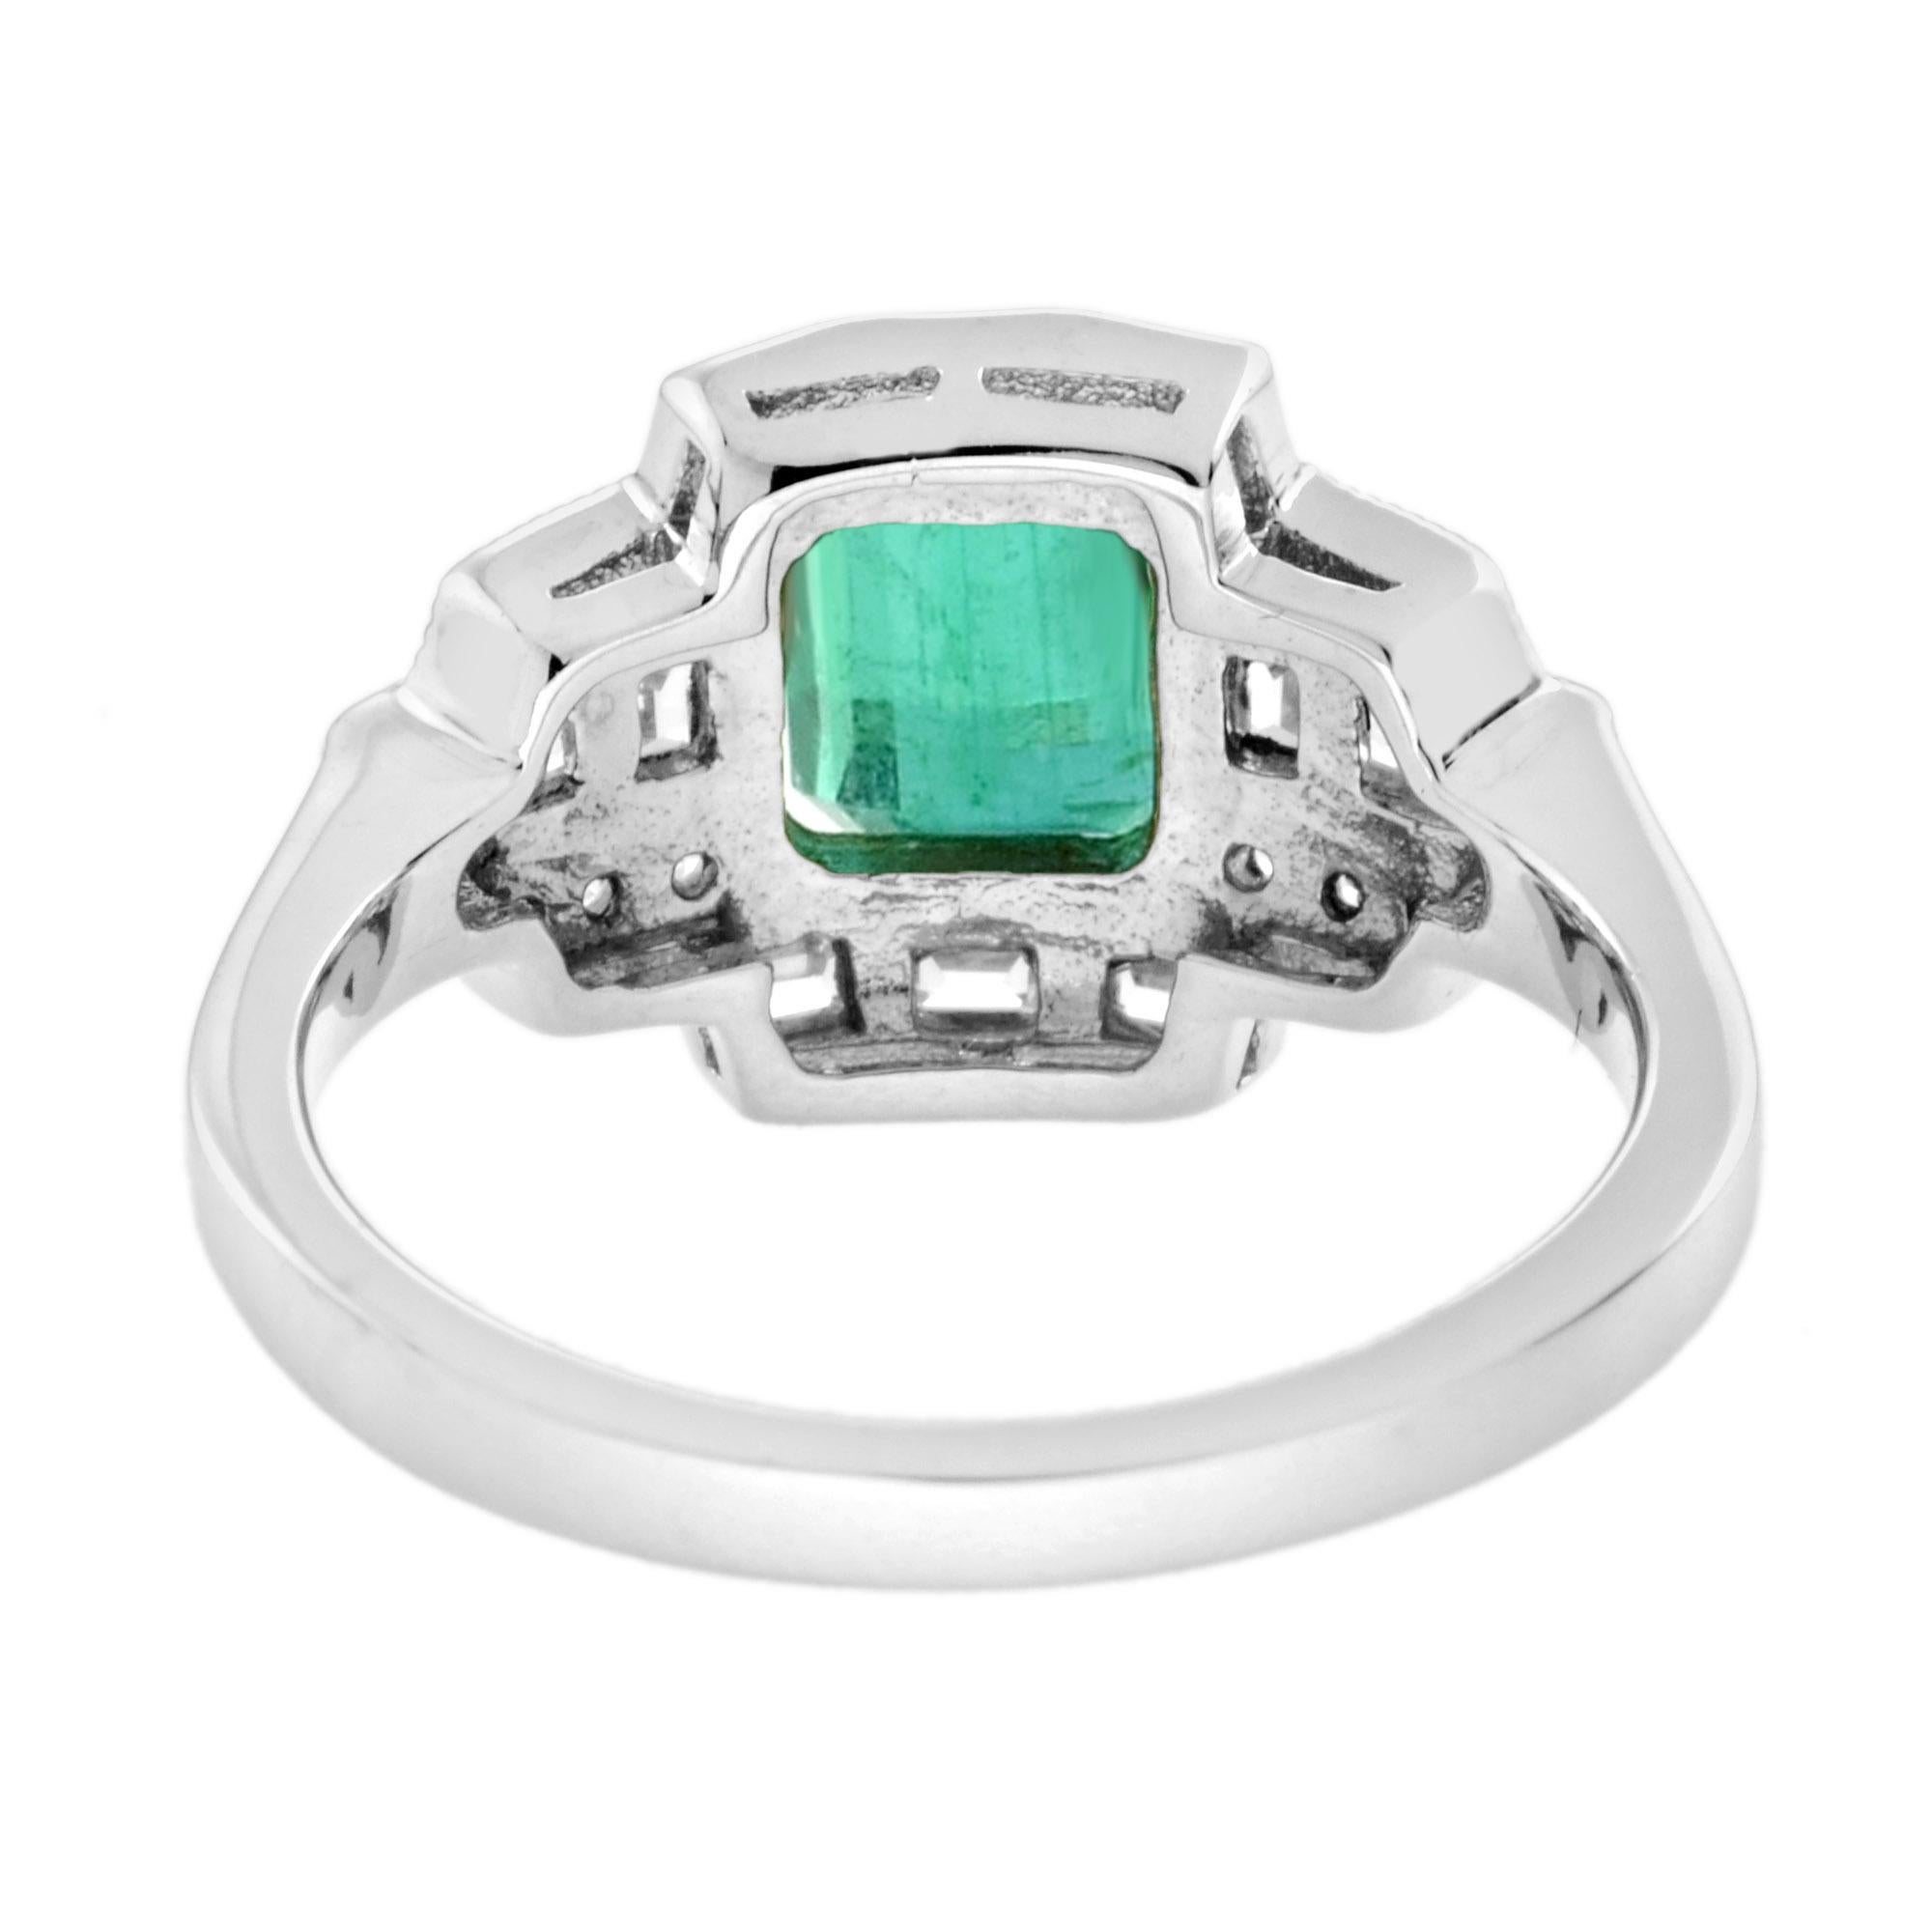 Women's 1.65 Ct. Emerald and Diamond Art Deco Style Engagement Ring in 18K White Gold For Sale